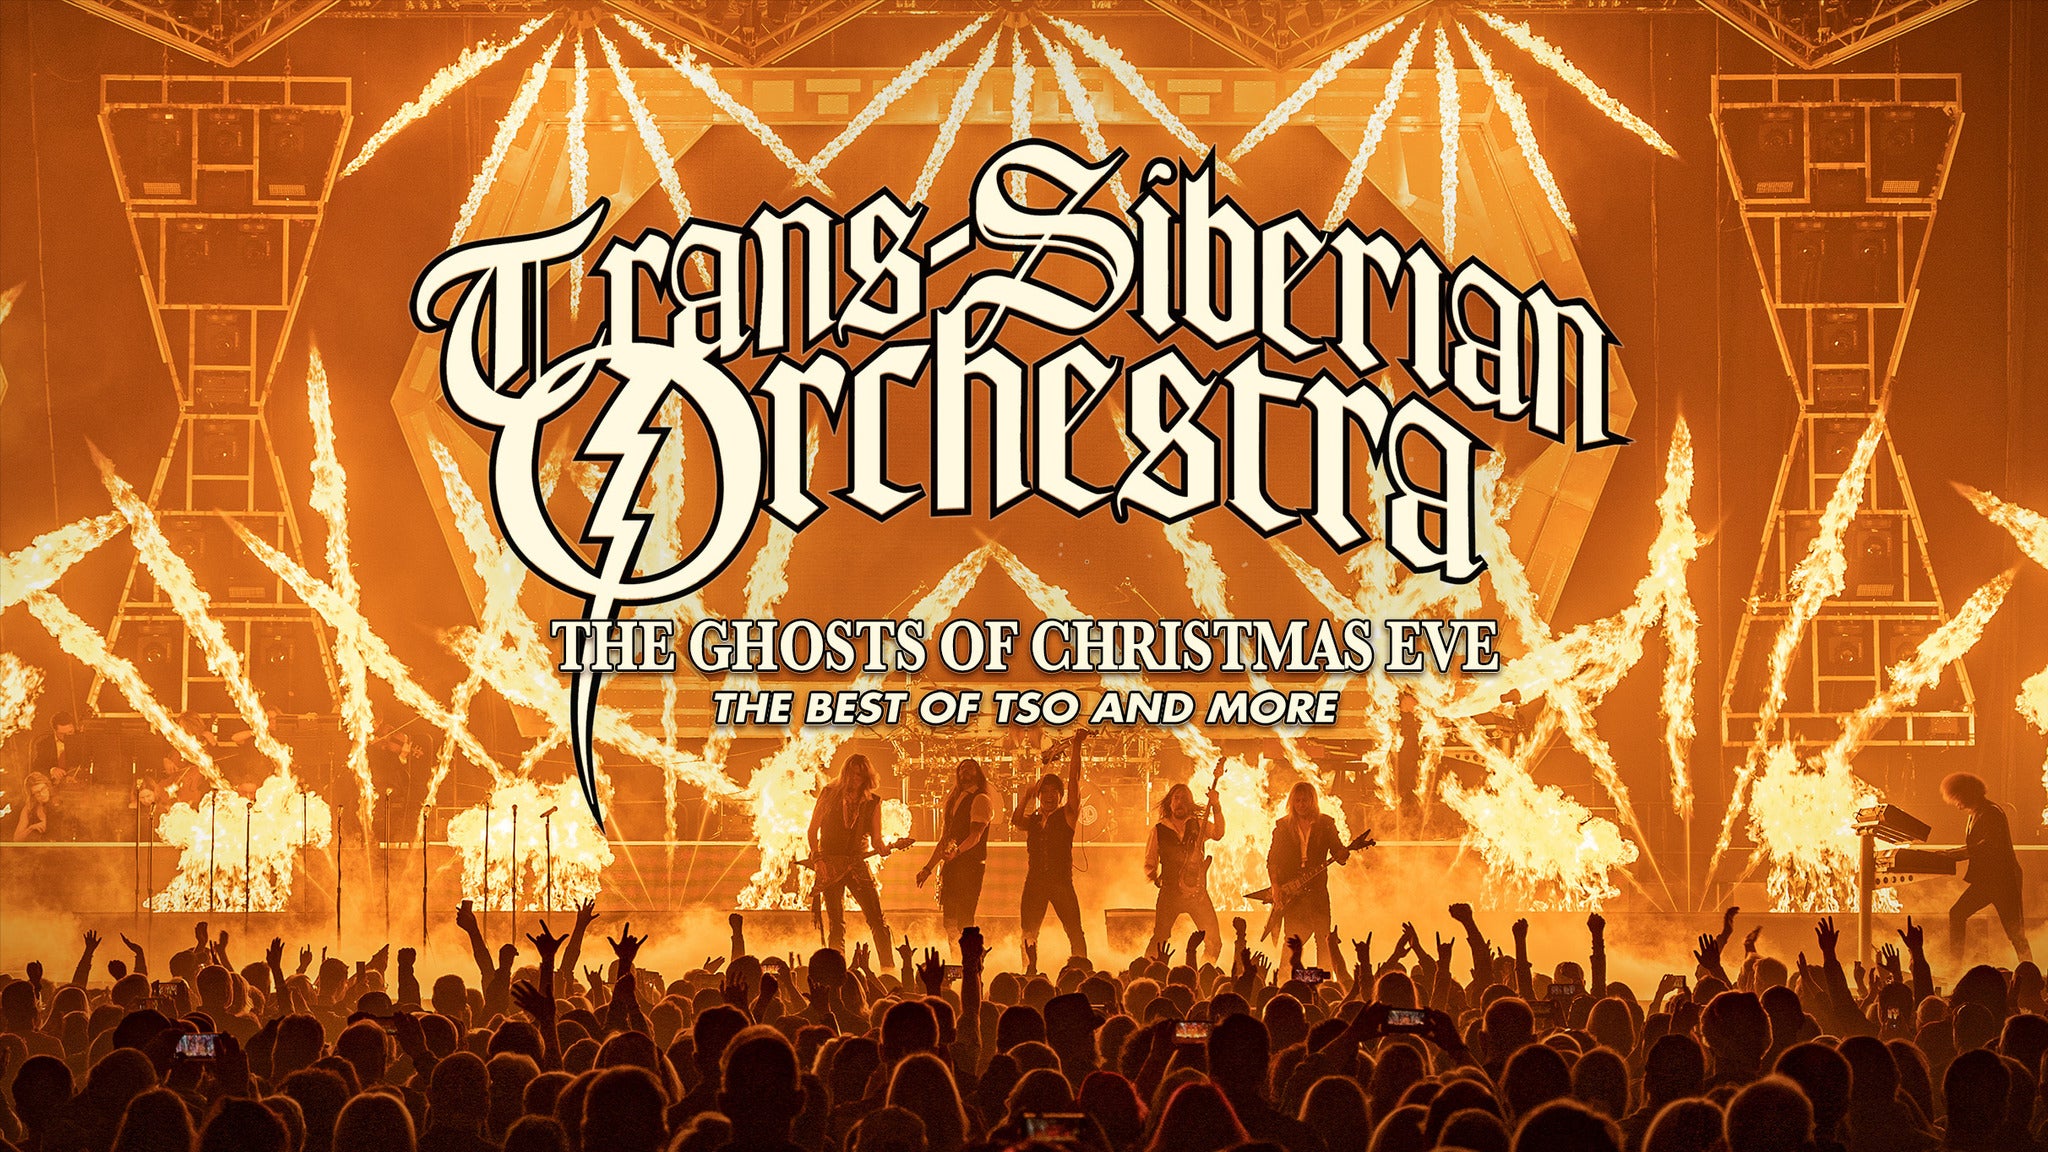 Multi-generational rock group Trans-Siberian Orchestra Presents 2022 Tour "The Ghosts of Christmas Eve"